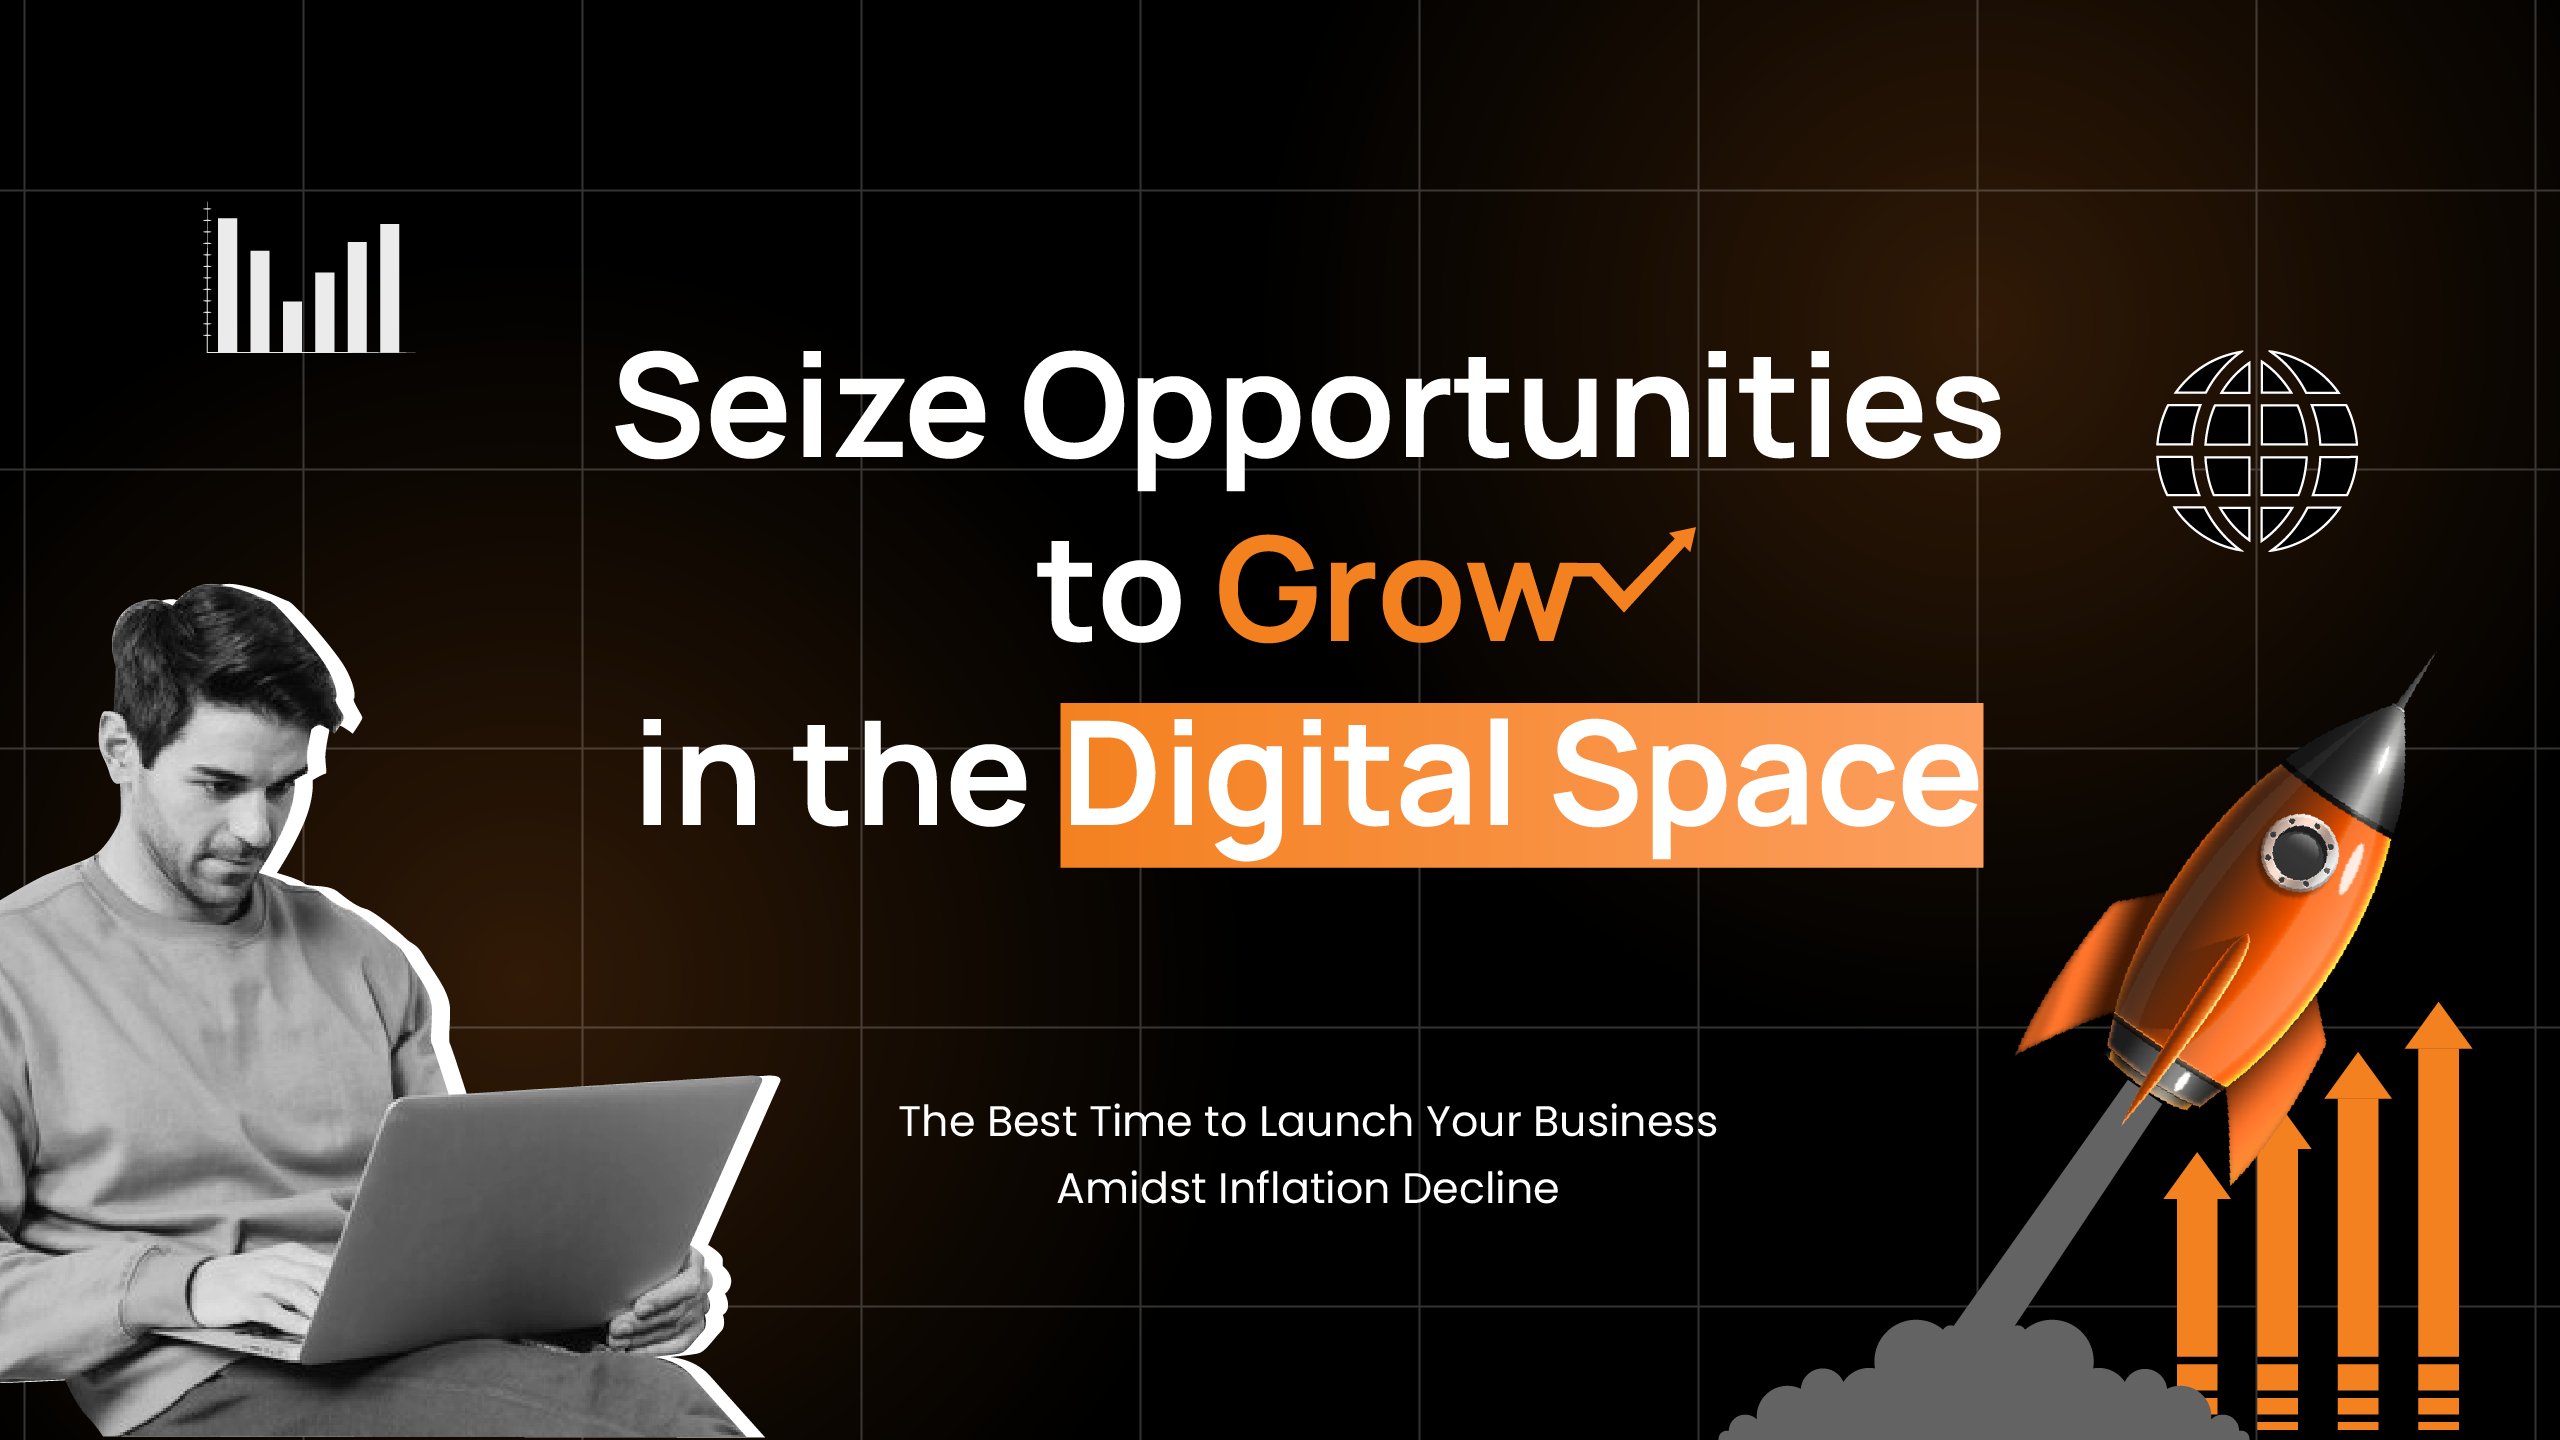 Seize Opportunities to Grow in the Digital Space: The Best Time to Launch Your Business Amidst Inflation Decline